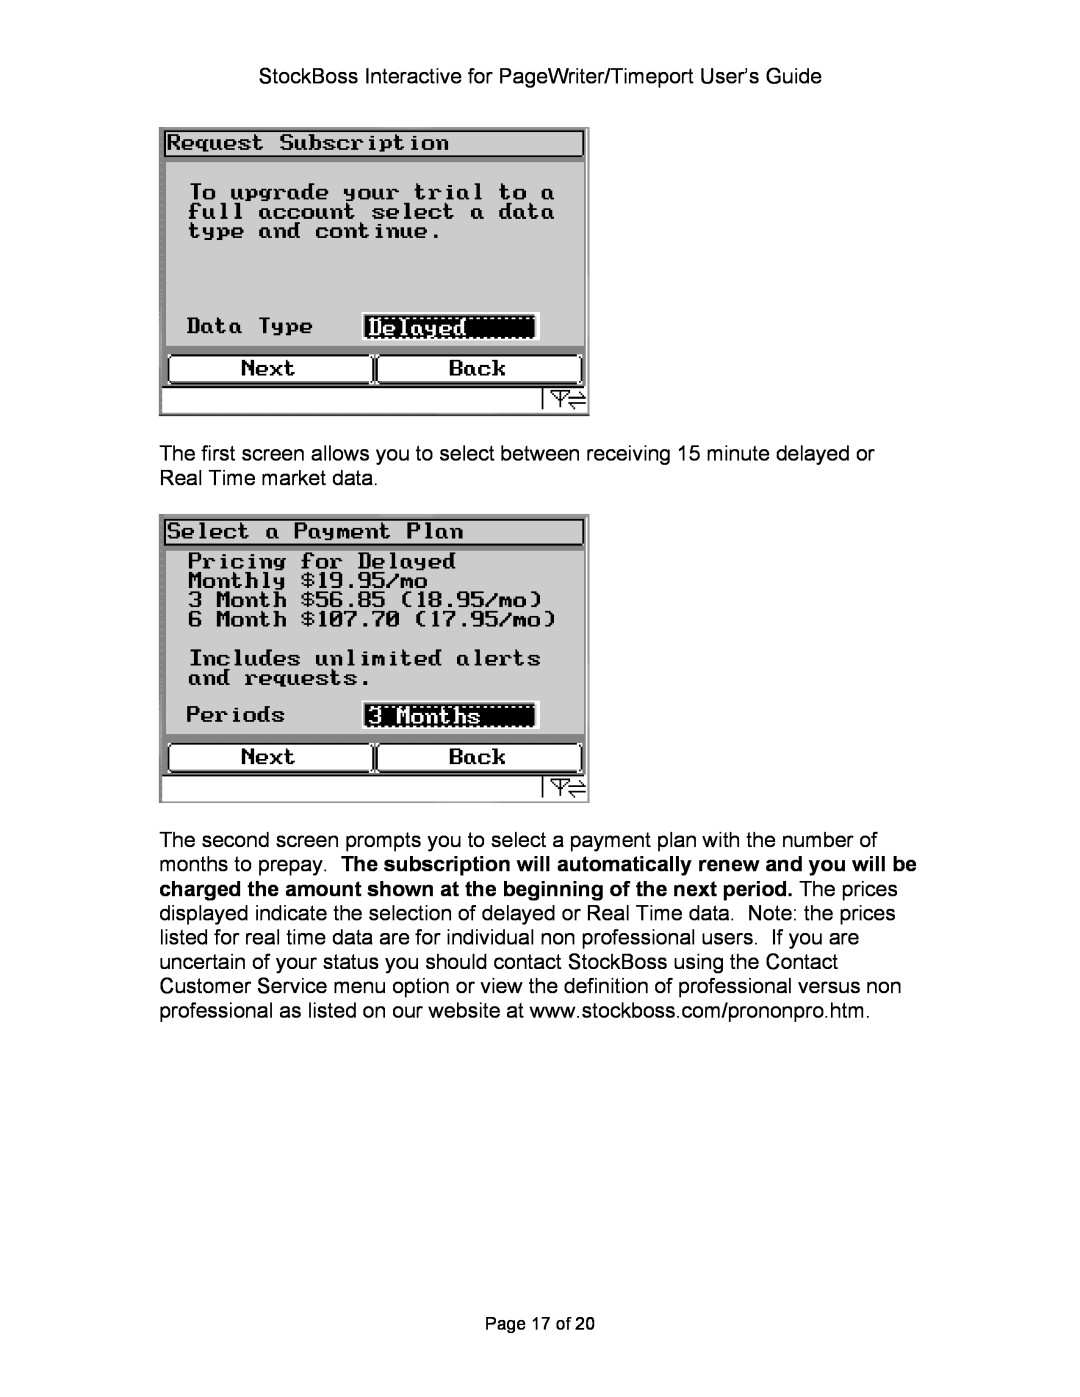 Motorola P930 Series manual StockBoss Interactive for PageWriter/Timeport User’s Guide, Page 17 of 